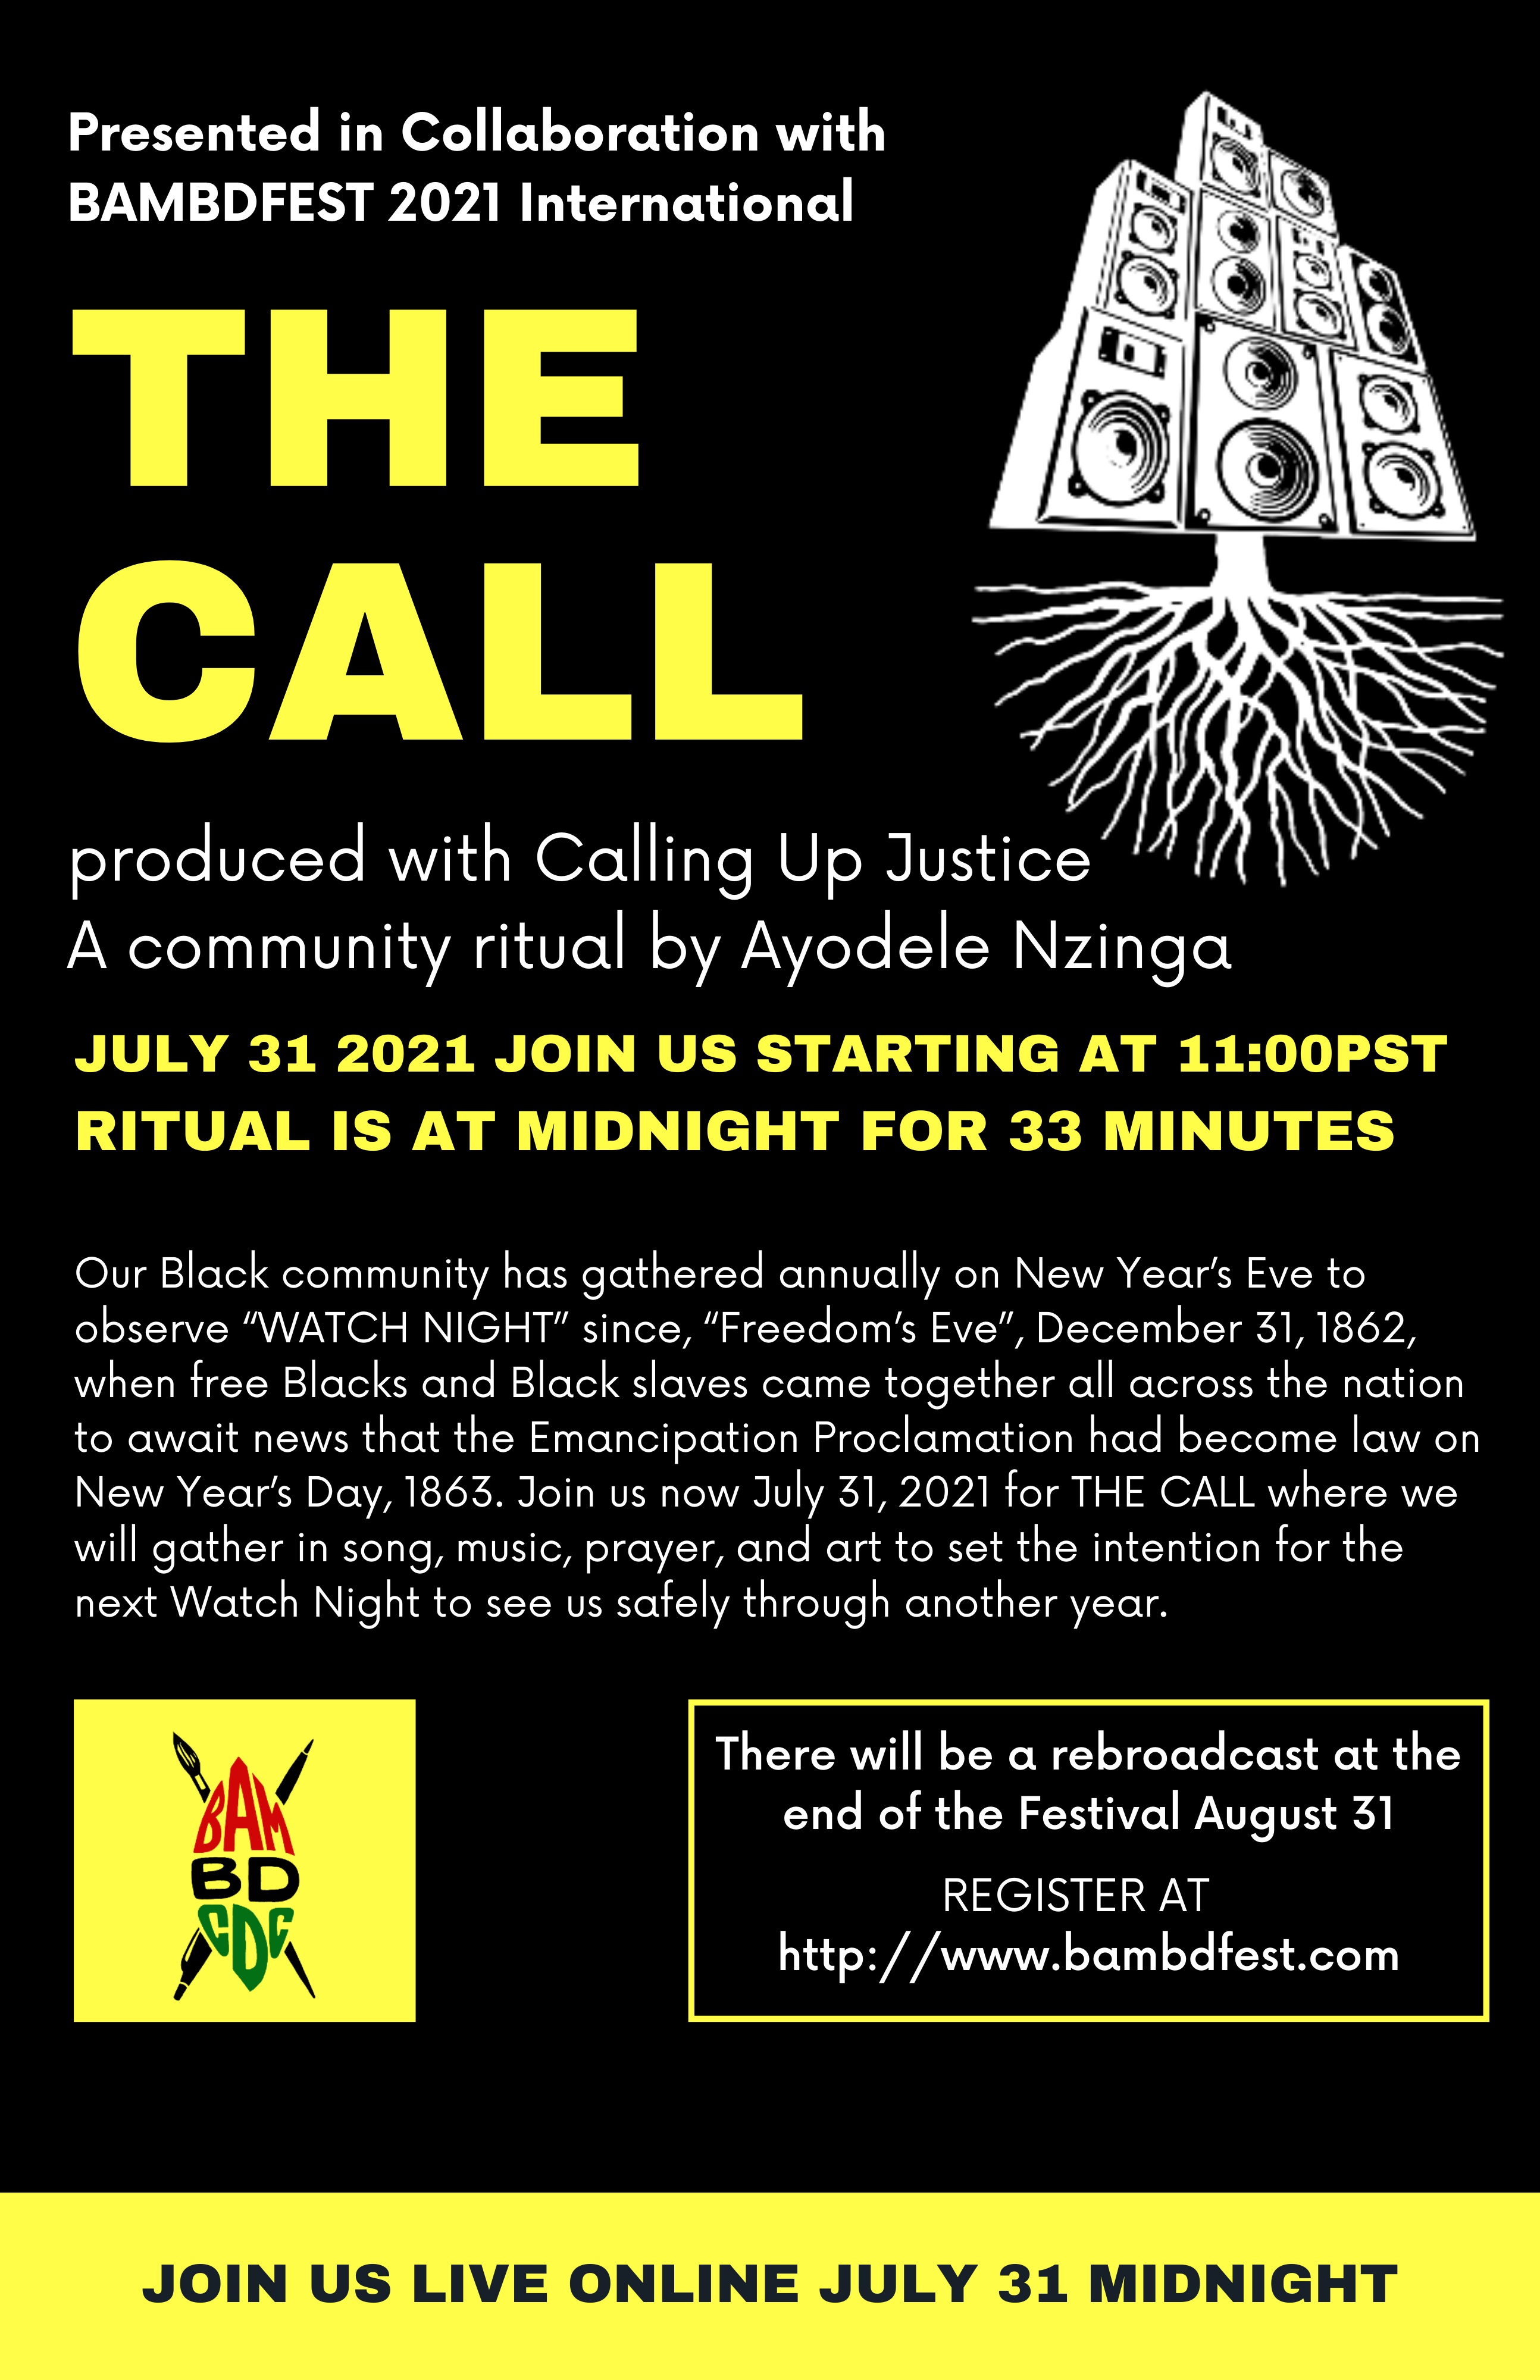 poster for The Call